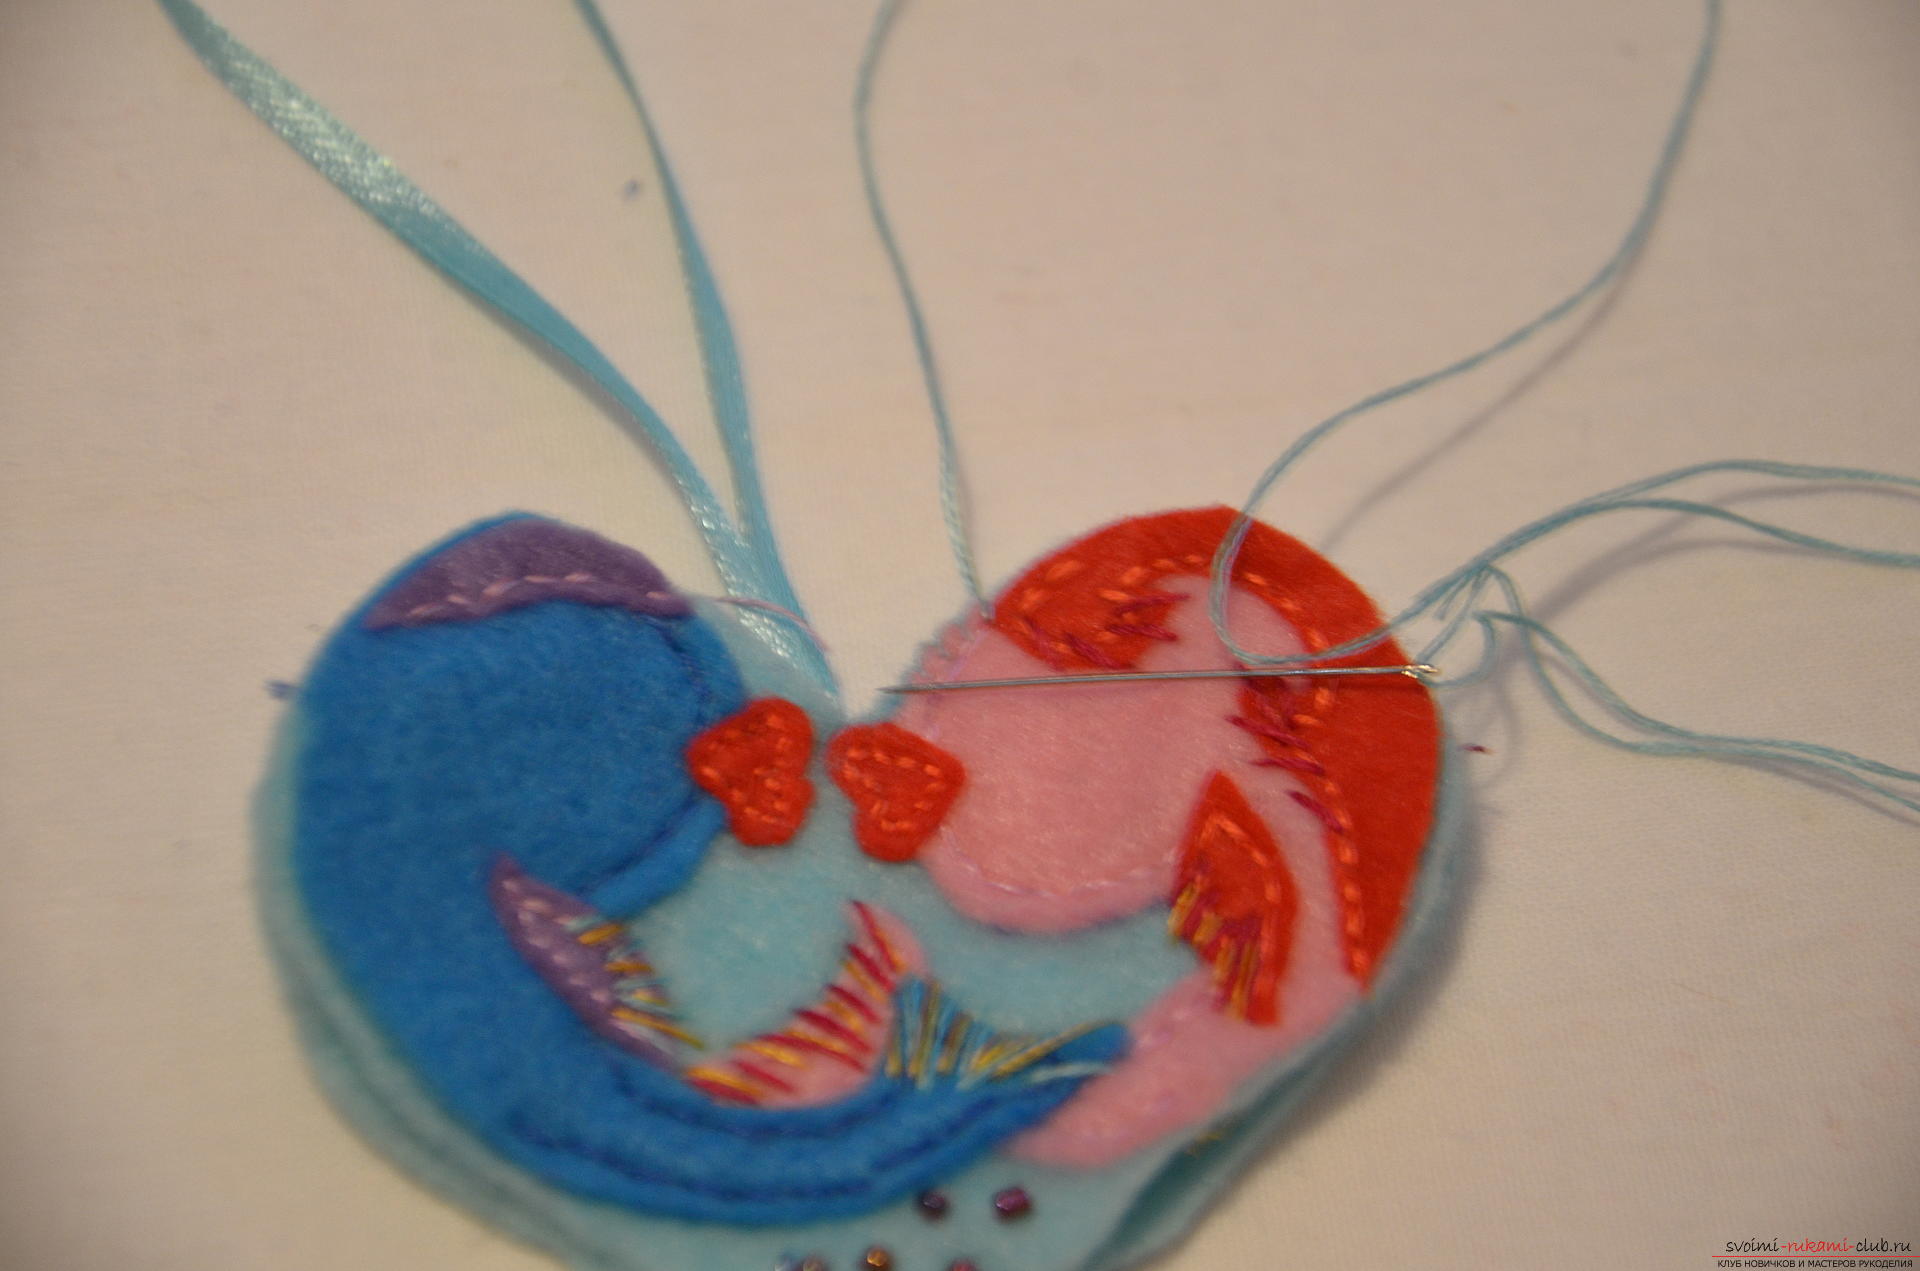 This master class will teach how to sew the original valentines on February 14 - fish from felt .. Photo # 11